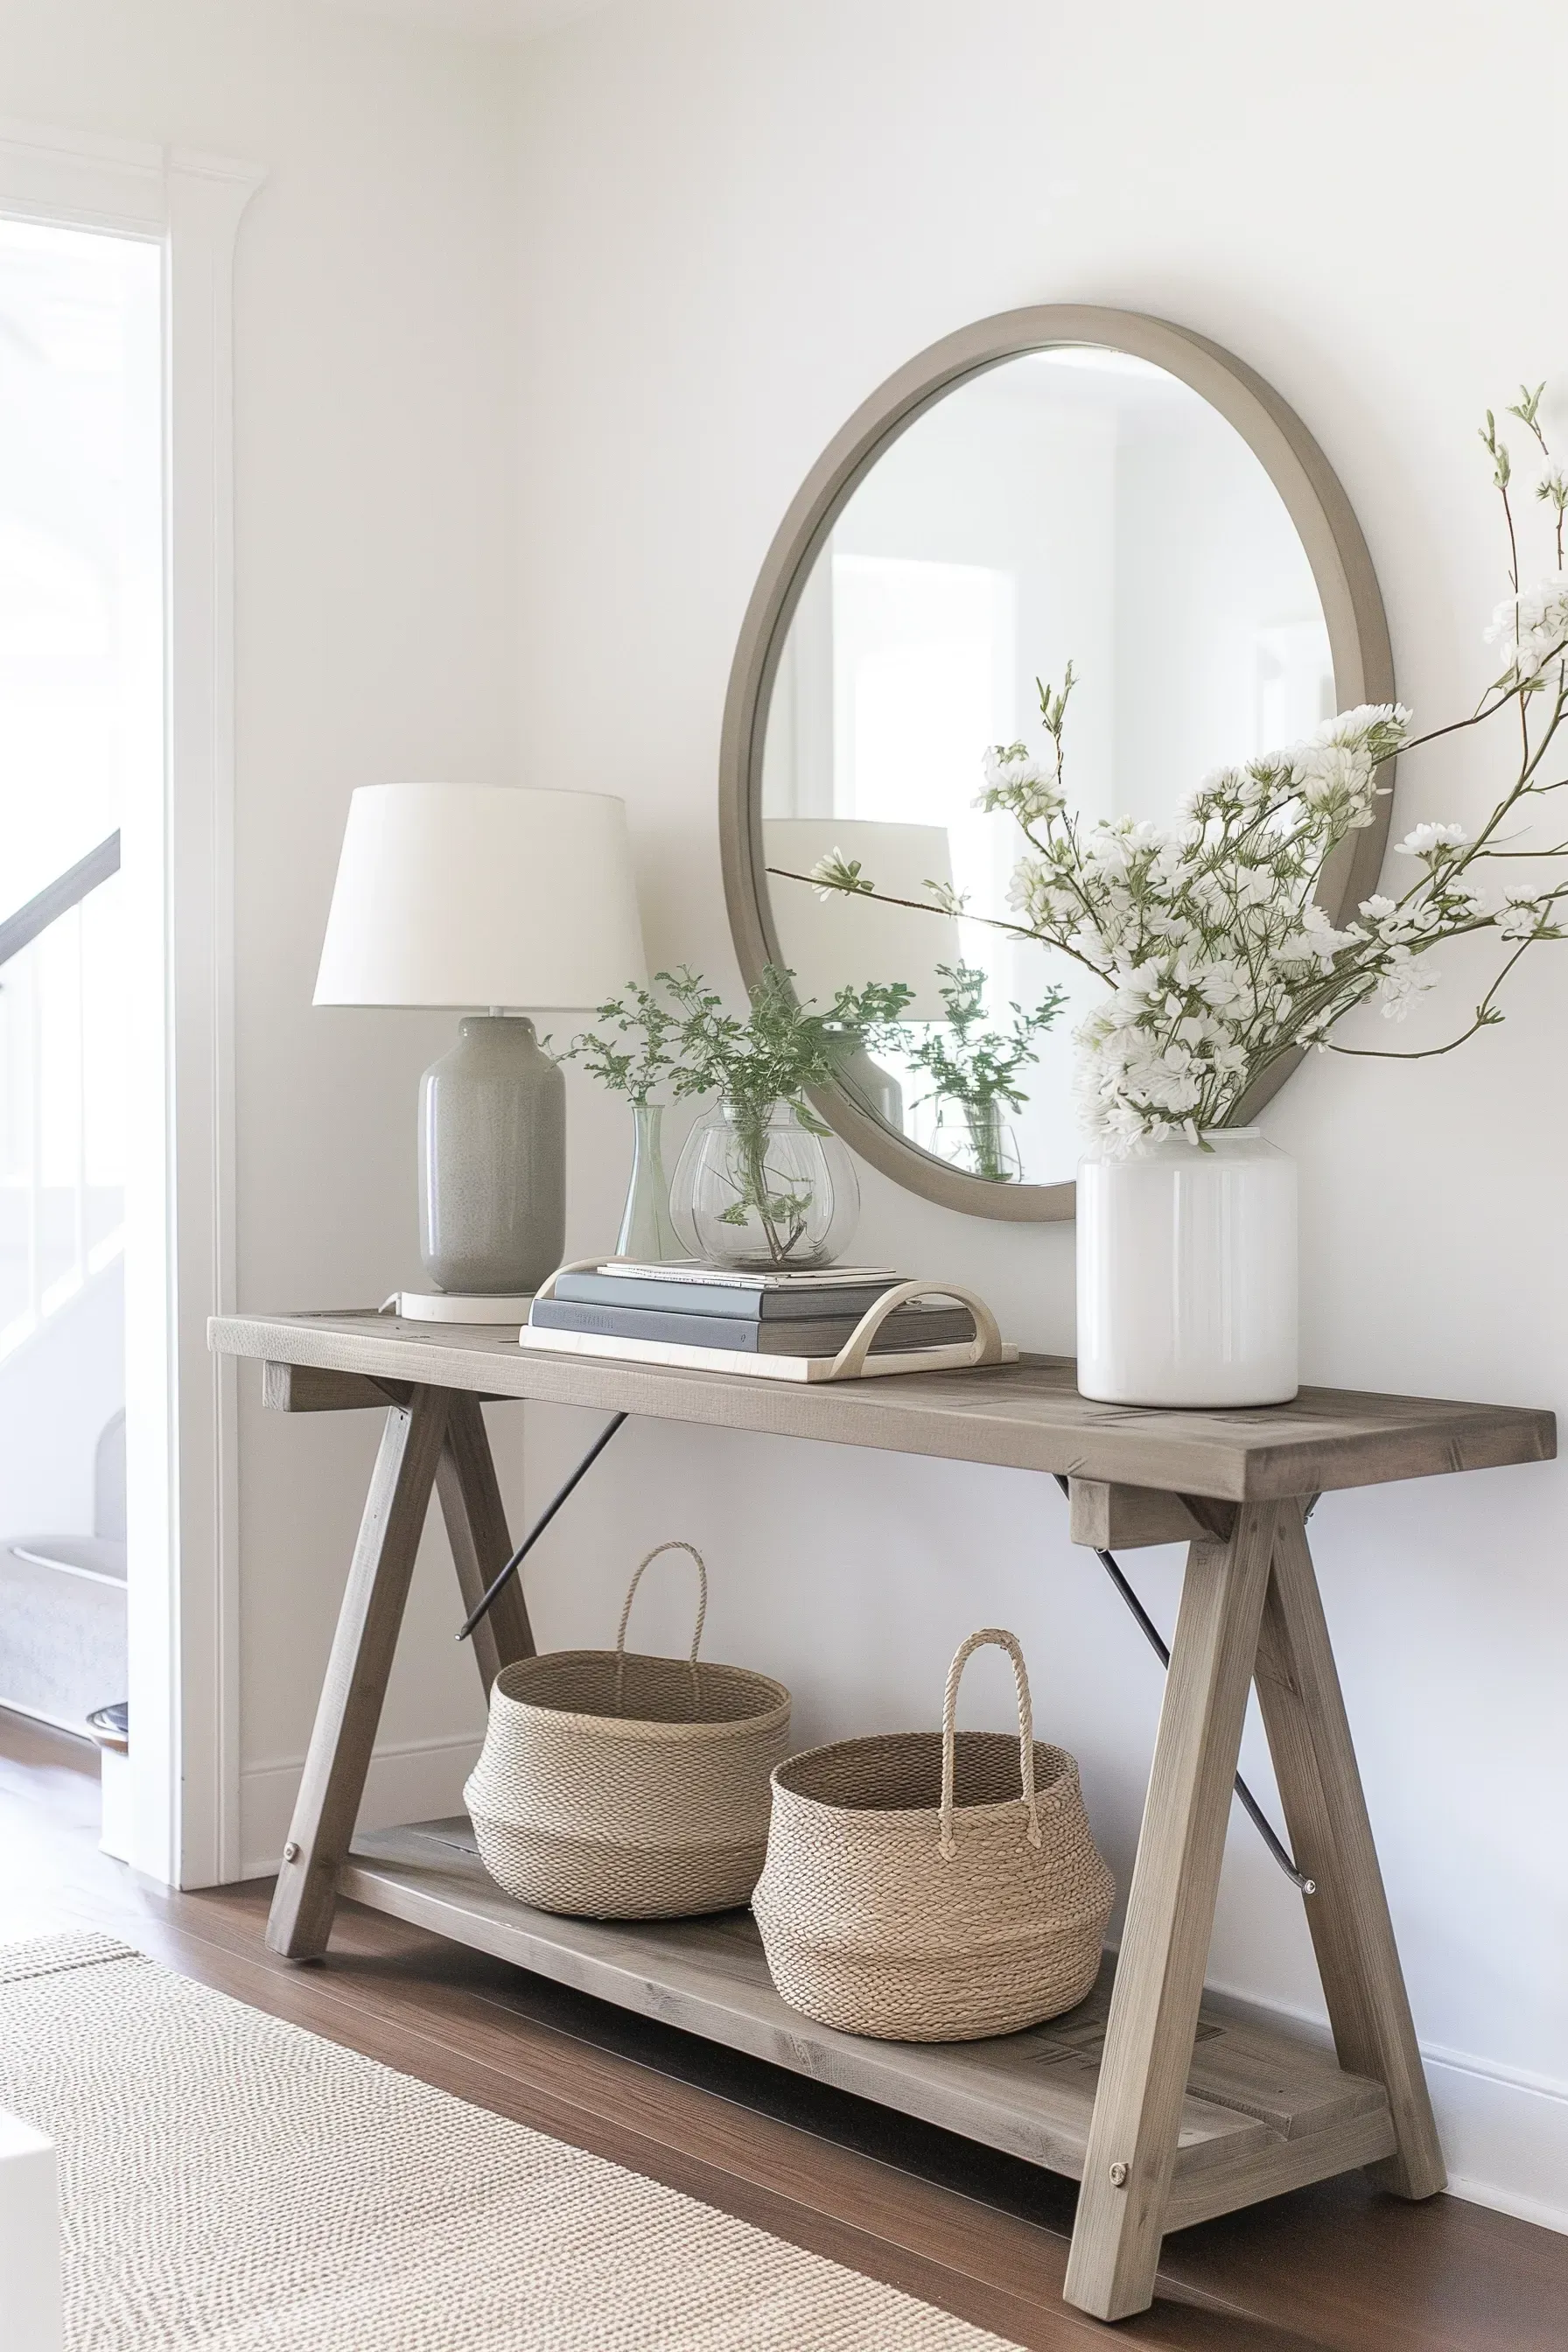 A white farmhouse wooden entry table with white flowers, coffee table books, and rattan baskets